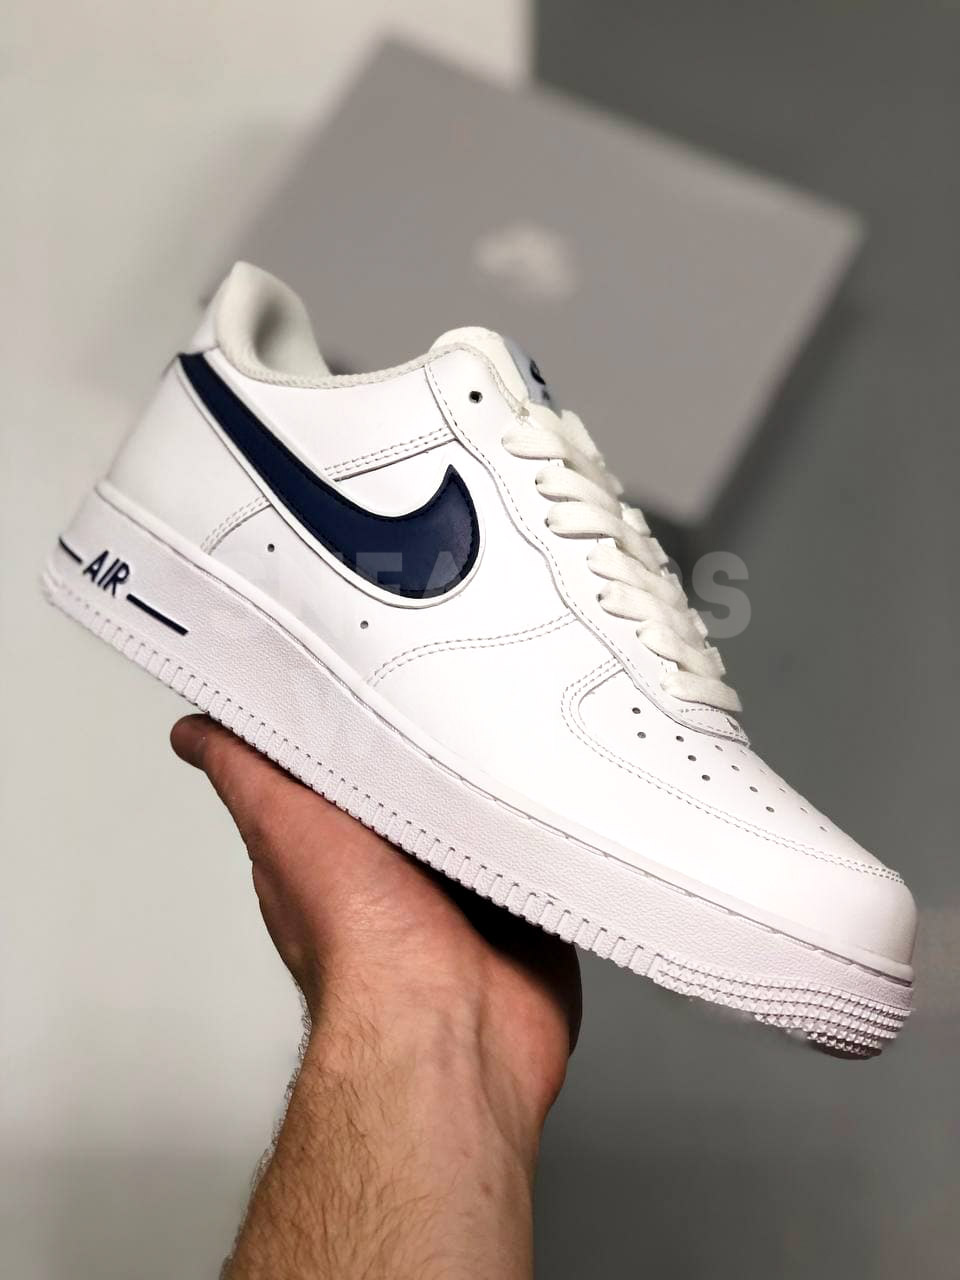 white and blue air force 1 07